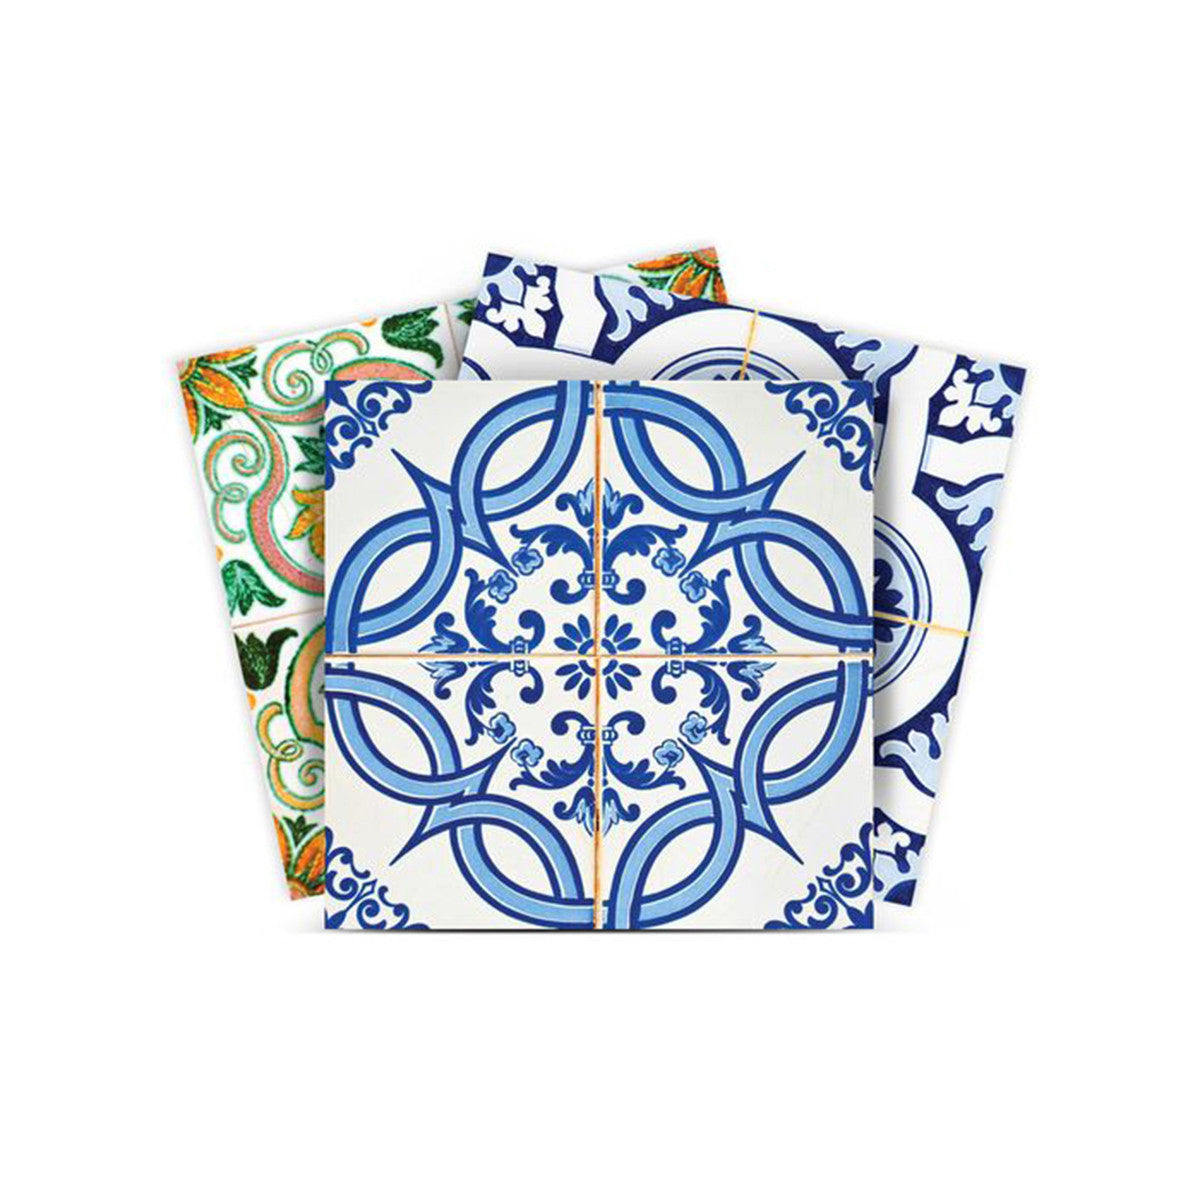 7" X 7" Cana Multi Mosaic Peel and Stick Tiles